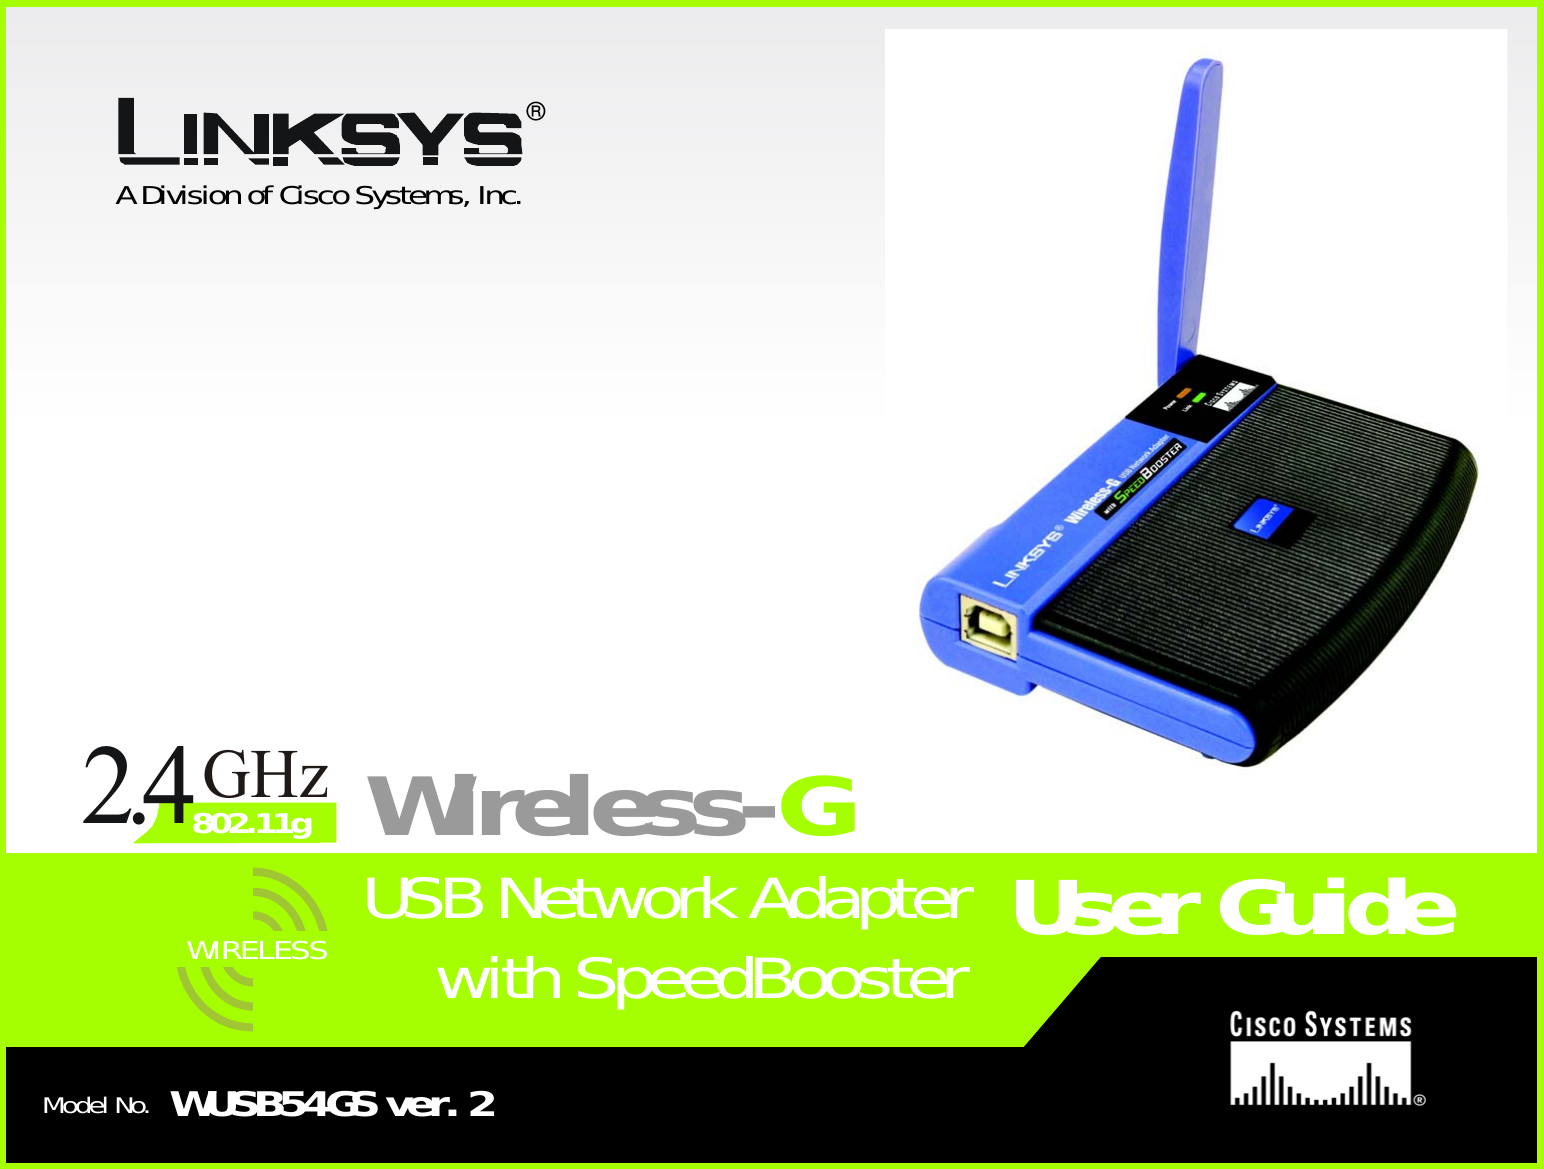 A Division of Cisco Systems, Inc.®Model No.USB Network AdapterWireless-GWUSB54GS ver. 2User GuideWIRELESSGHz2.4802.11gwith SpeedBooster